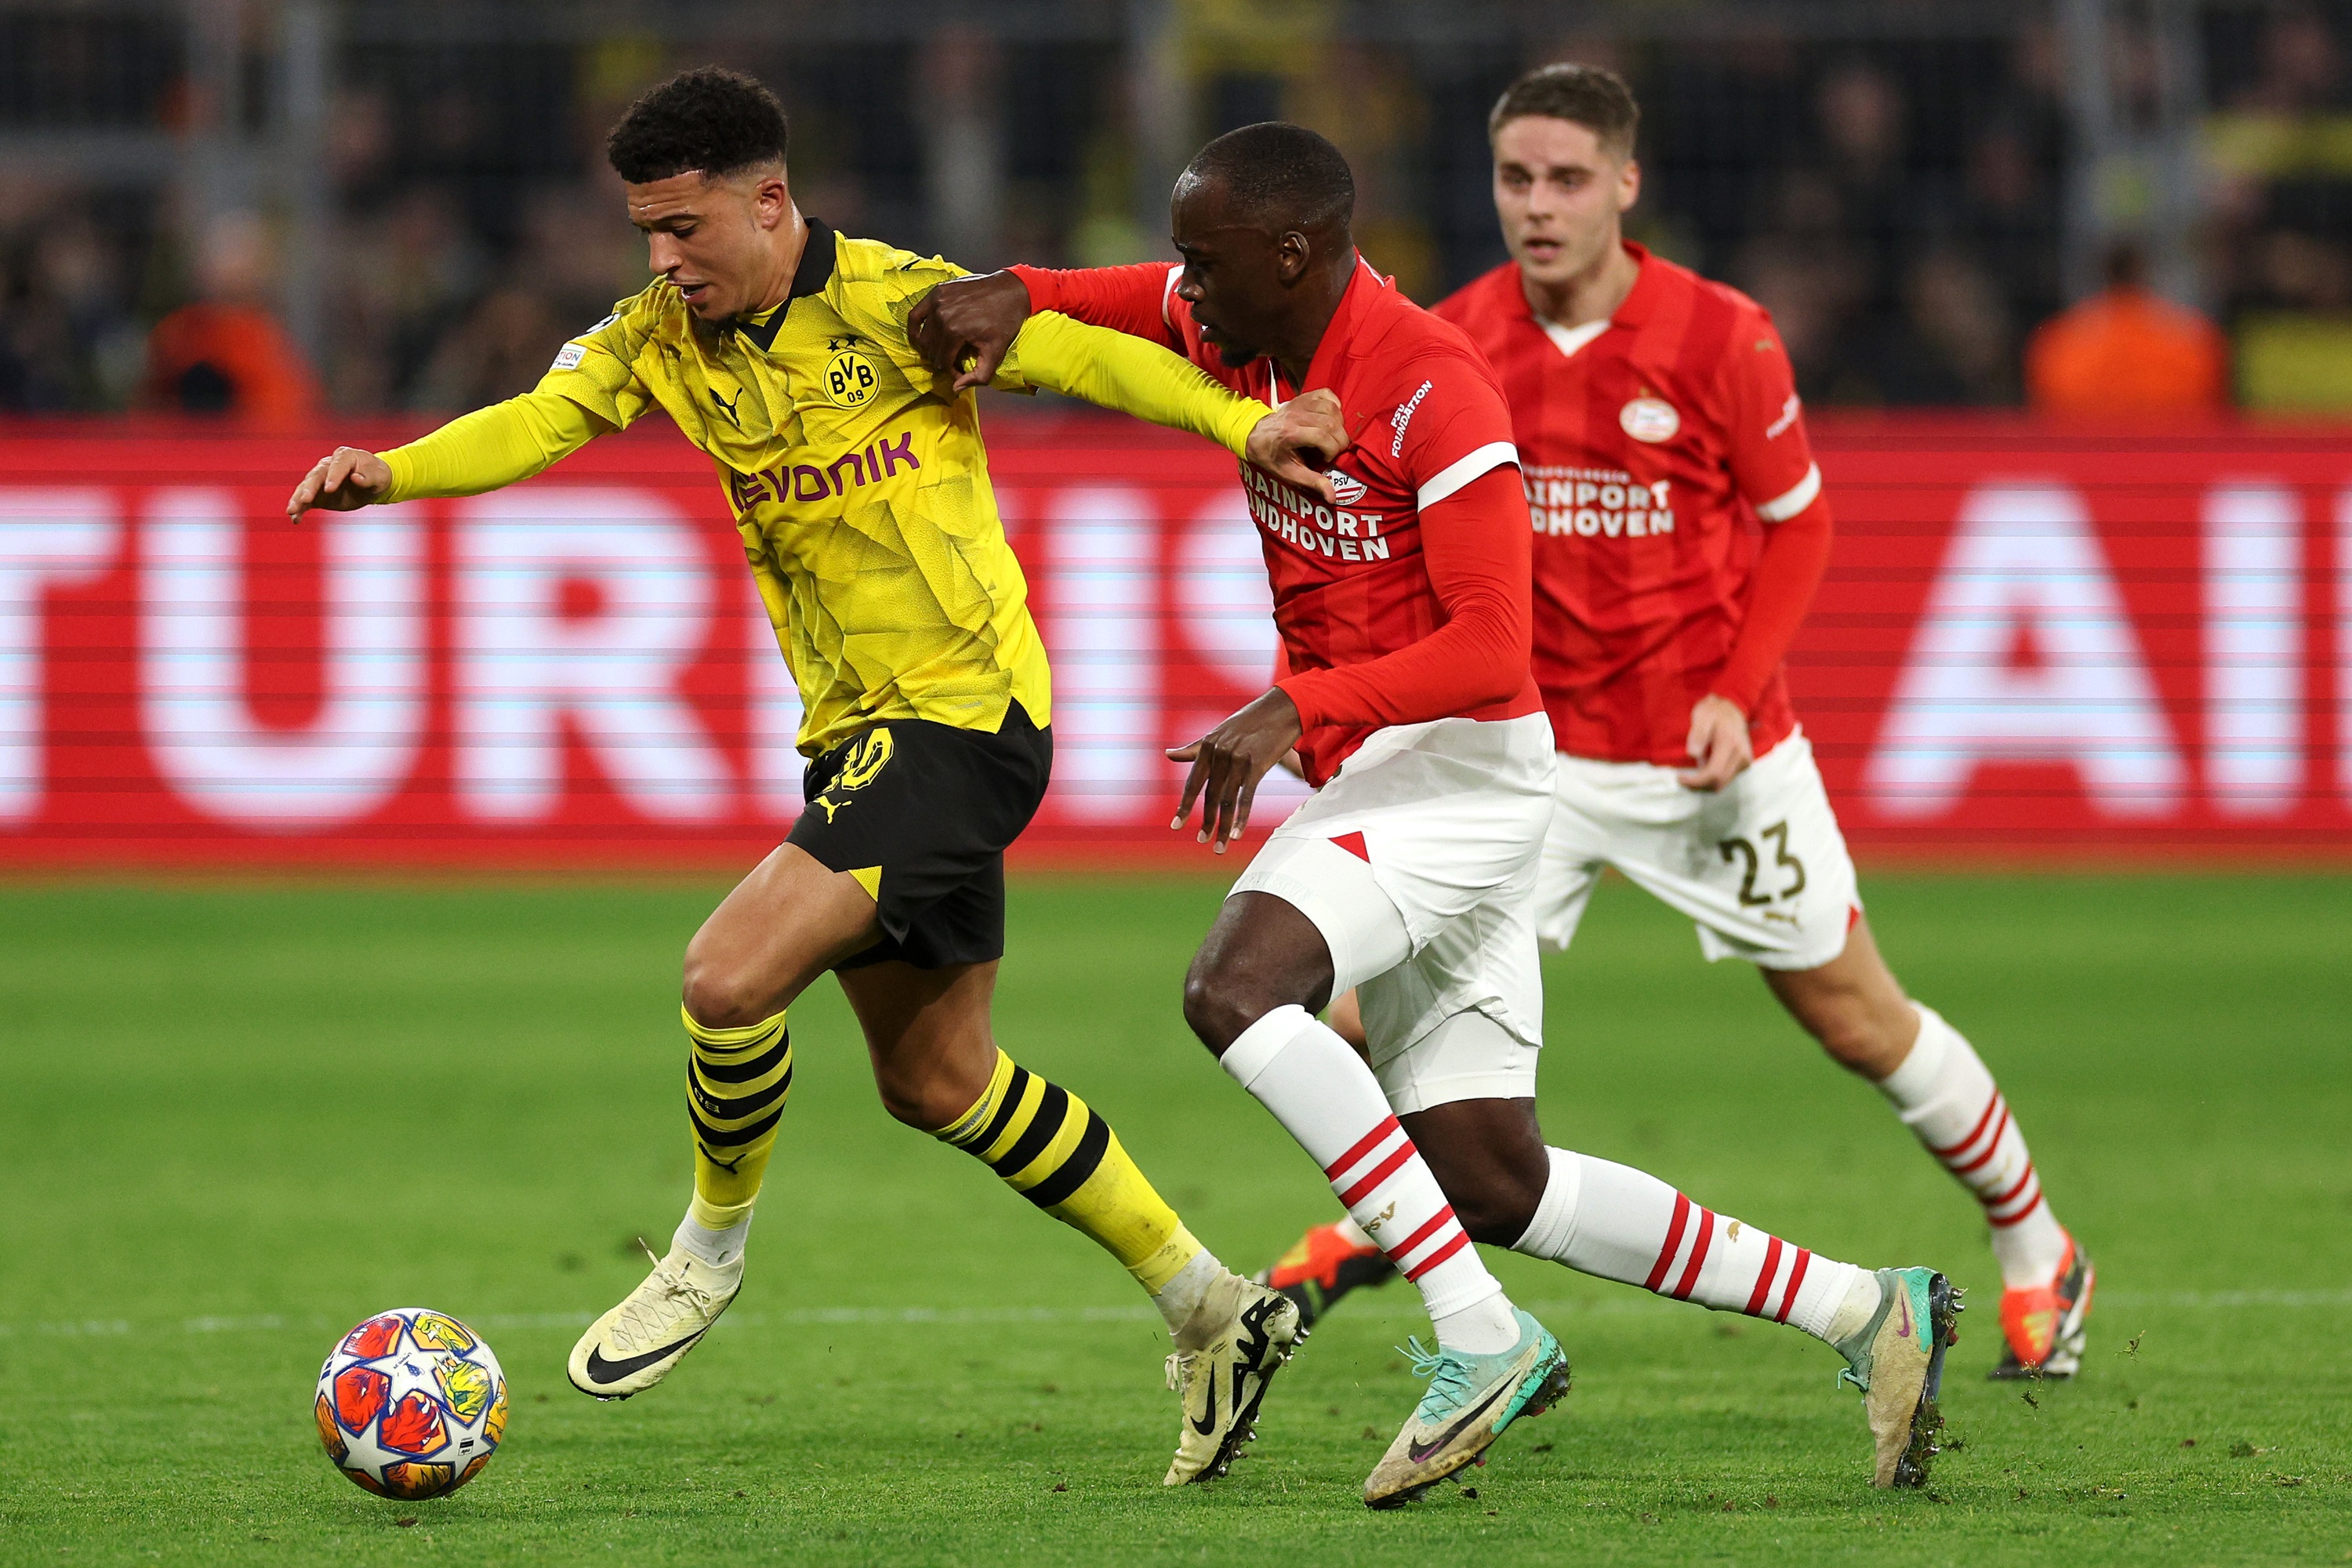 Jadon Sancho can earn Man United £3.4m if he plays in the UCL final